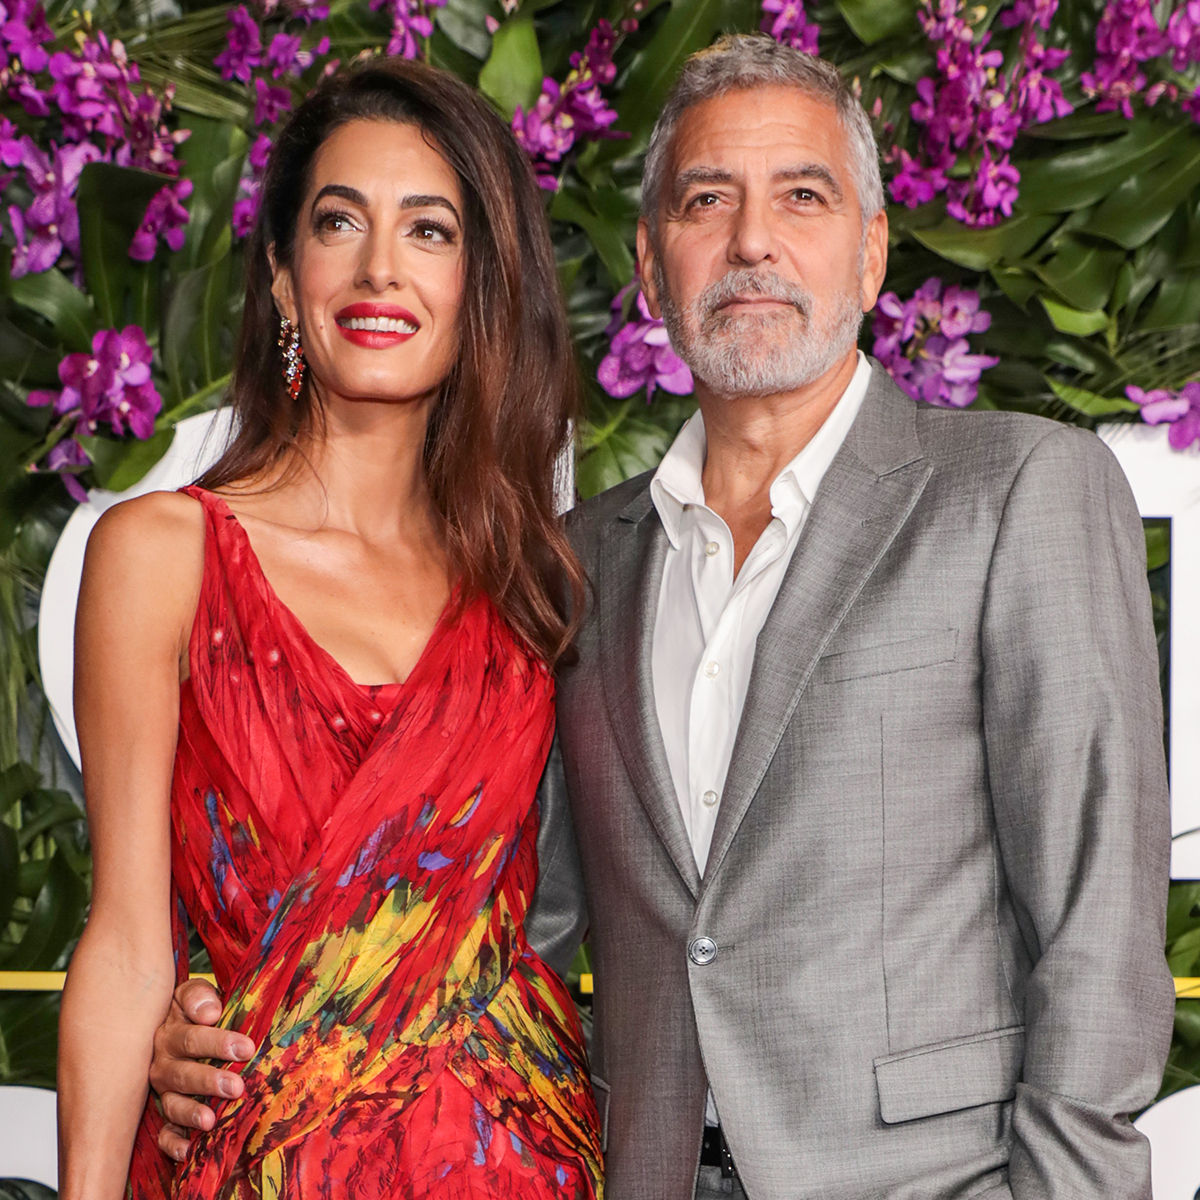 Amaland Porn - Amal Clooney News, Pictures, and Videos - E! Online